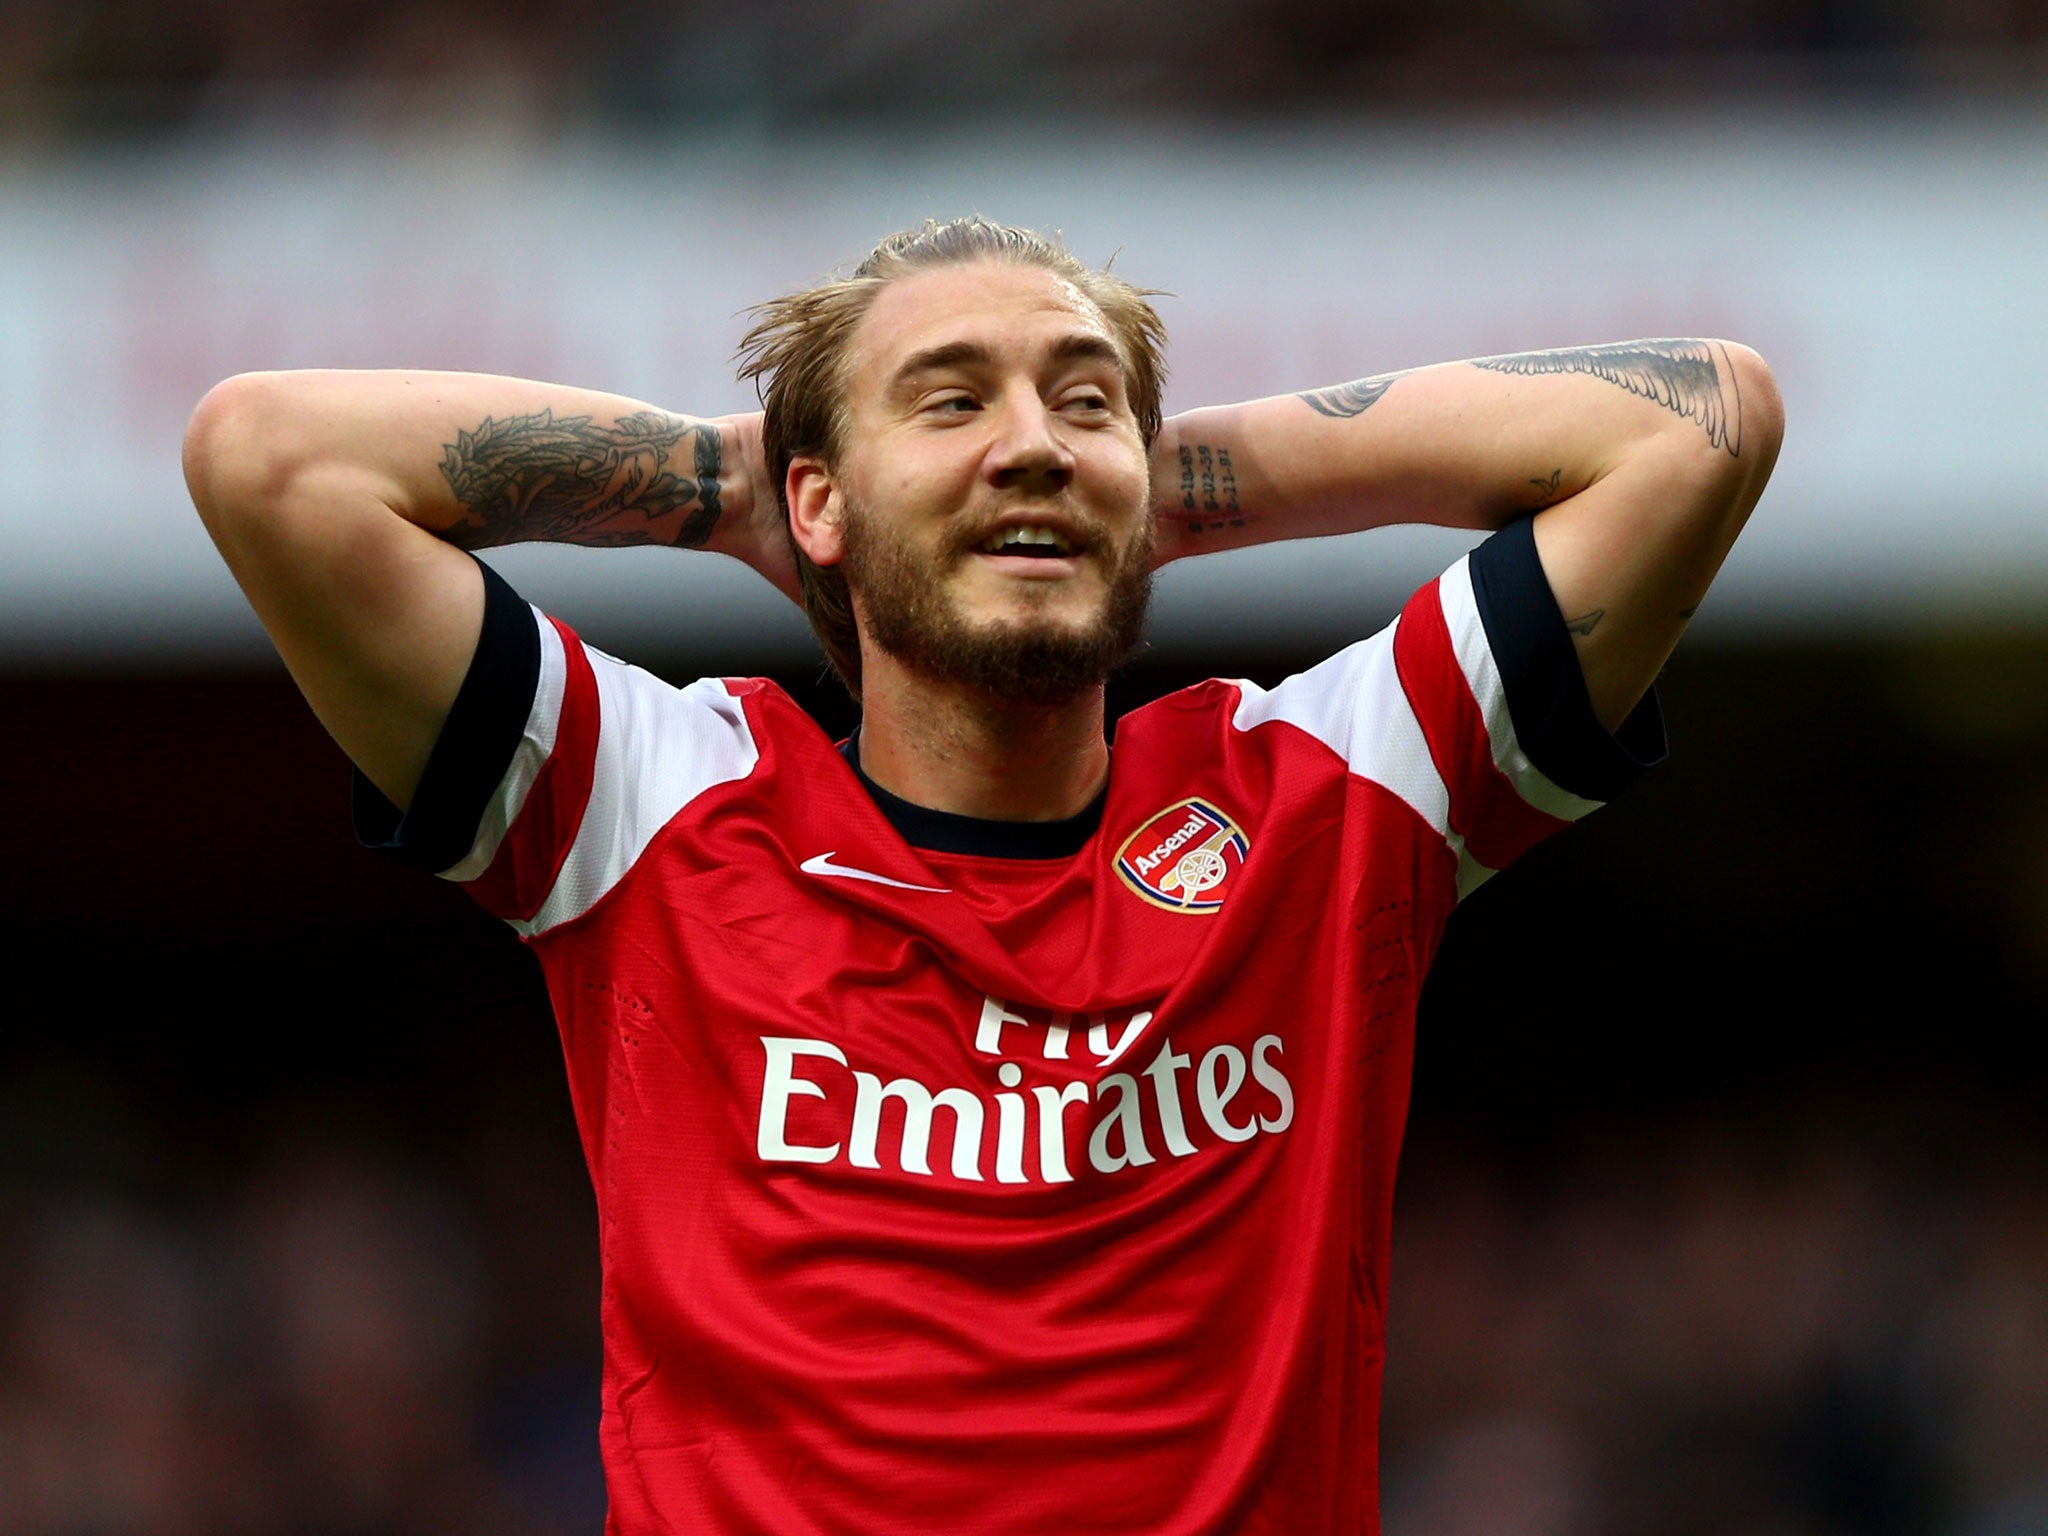 Nicklas Bendtner is out of contract at Arsenal at the end of the season